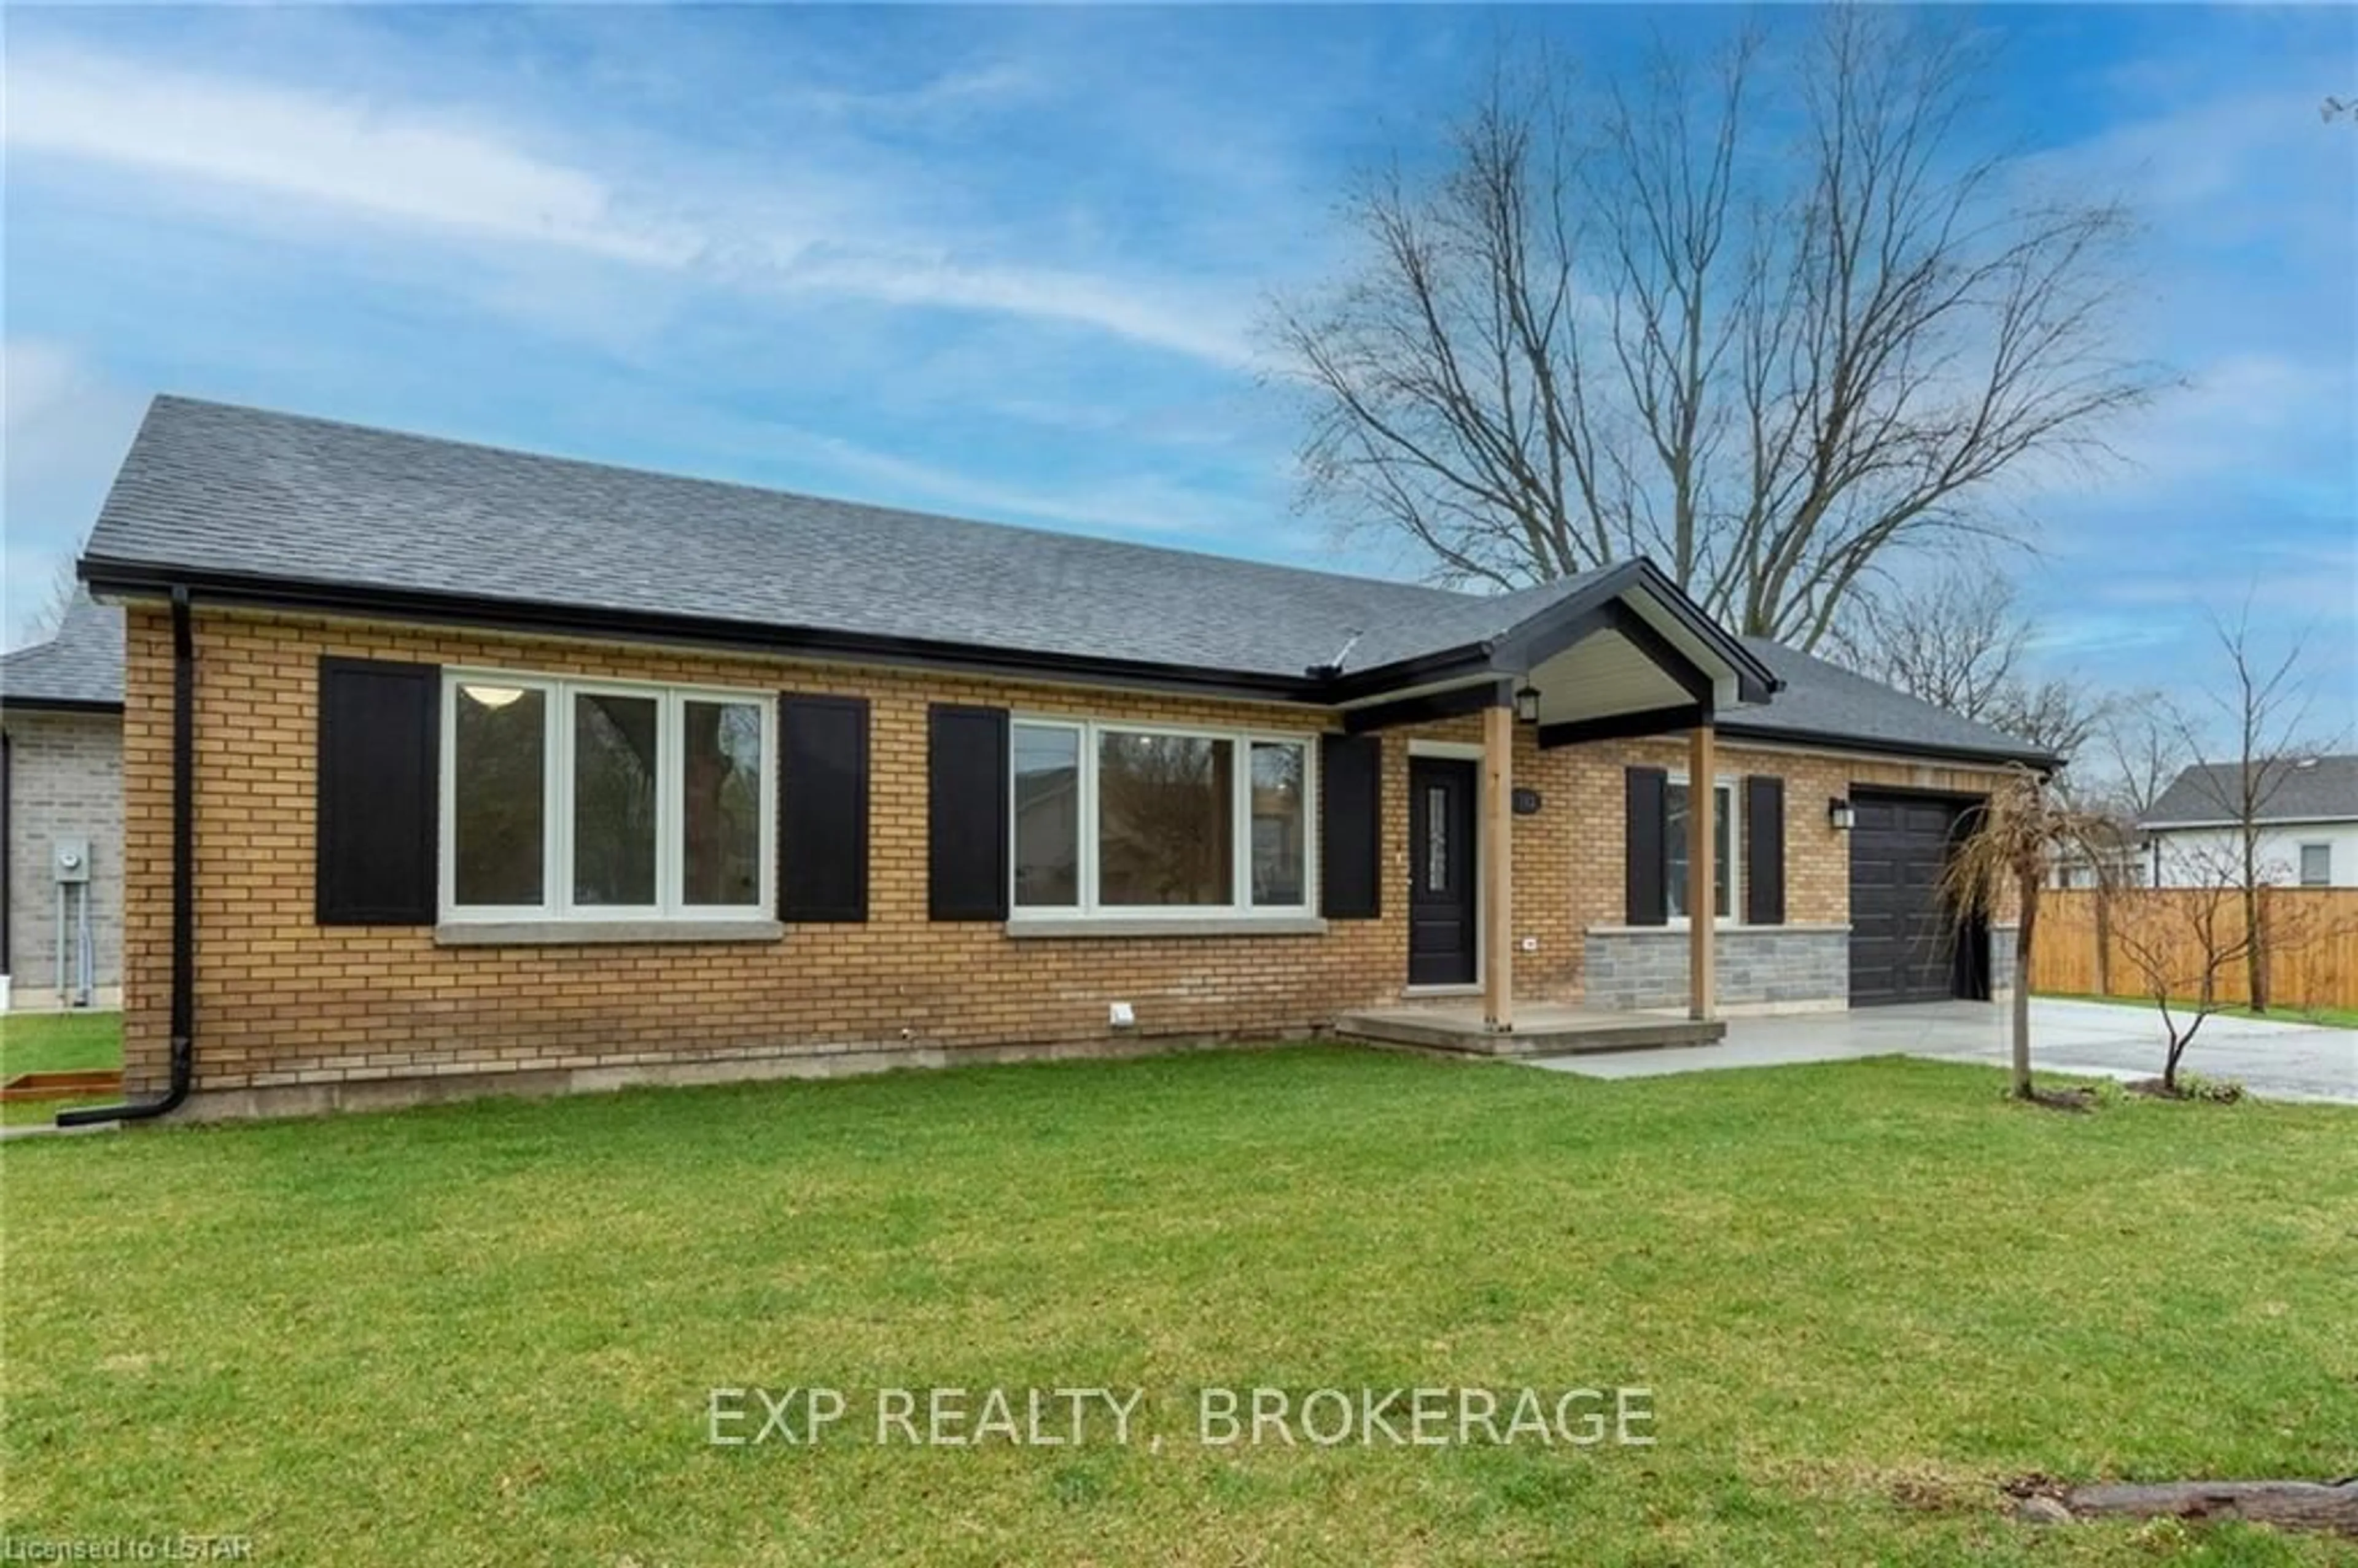 Home with brick exterior material for 162 Milliner St, Strathroy-Caradoc Ontario N7G 2Z4